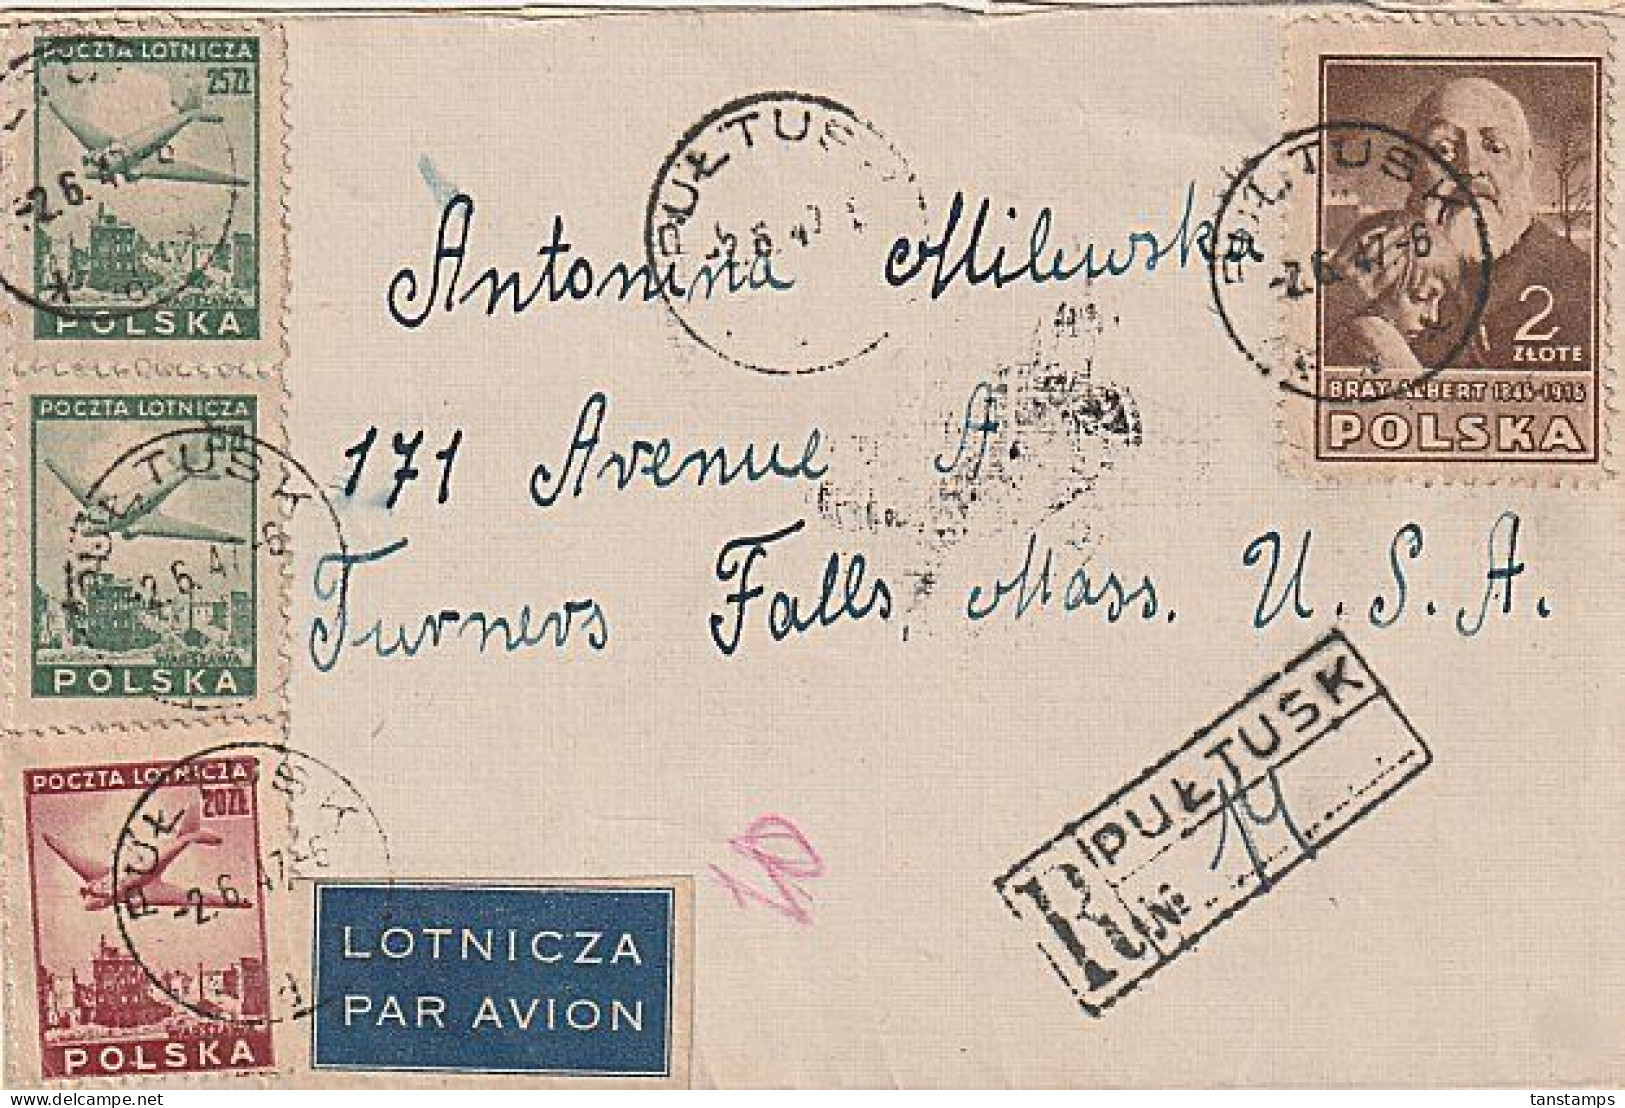 POLAND - USA REGISTERED PULTUSK AIRMAIL COVER - Airplanes